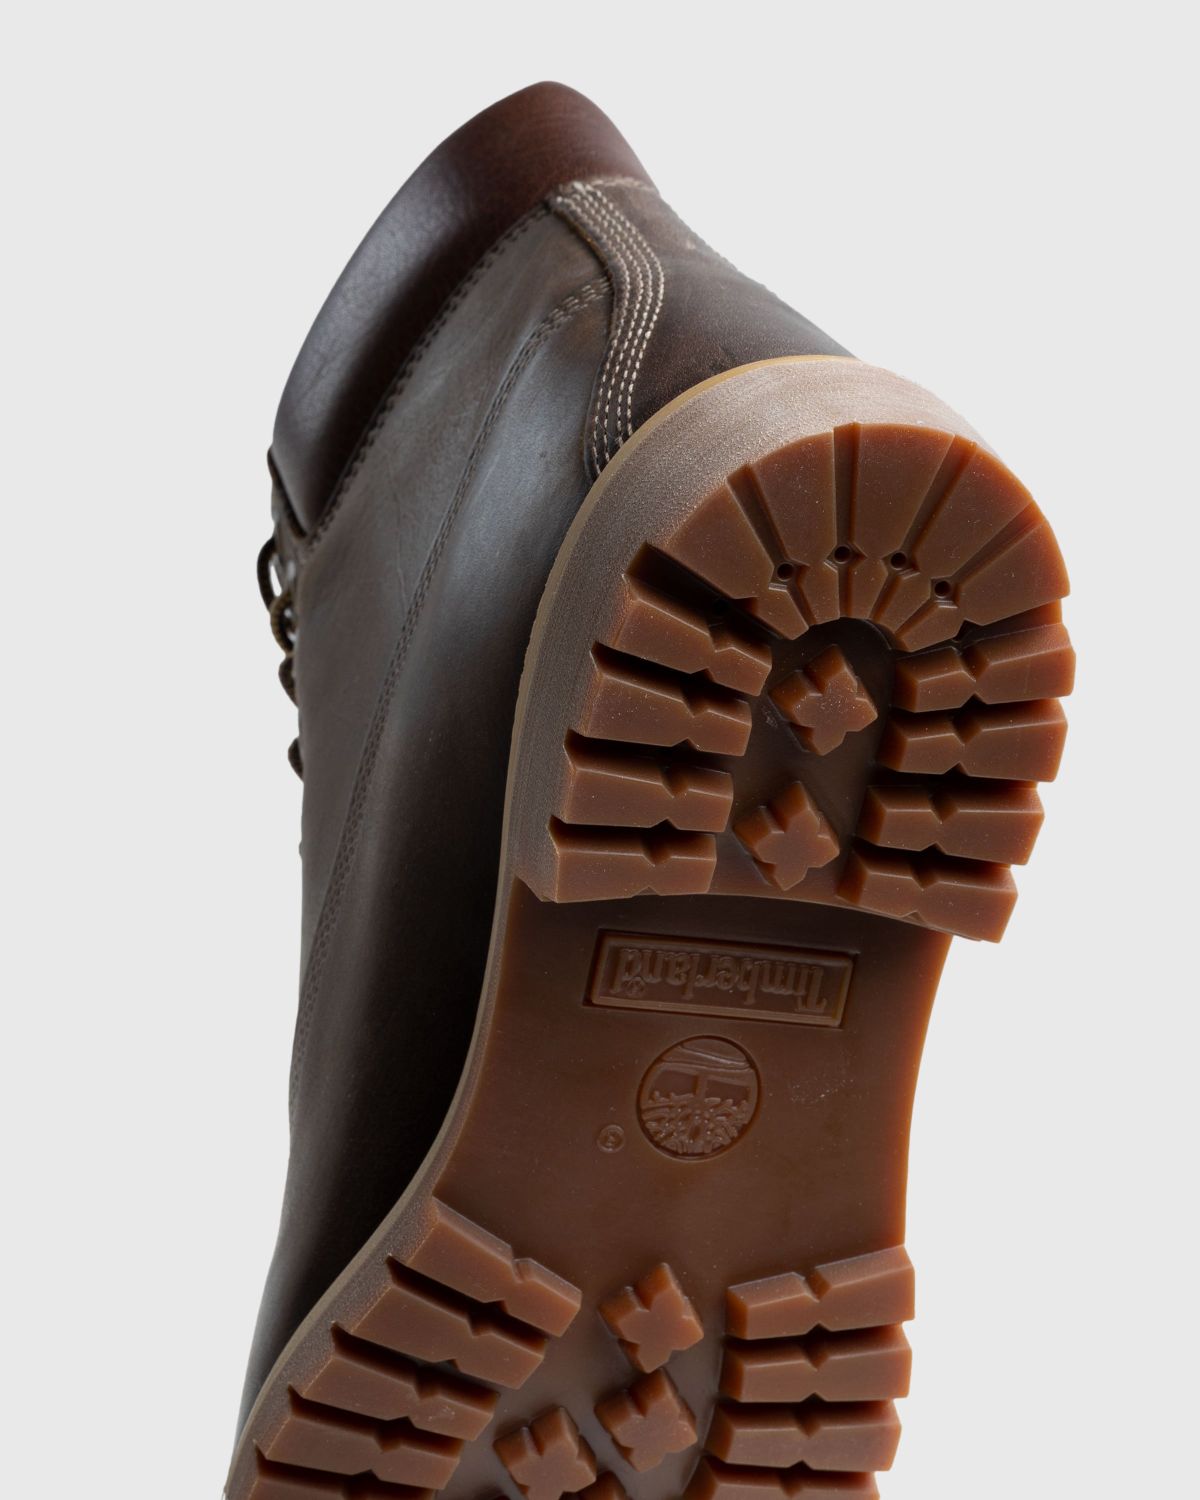 Timberland – Heritage 6 in Premium Brown - Boots - Brown - Image 5